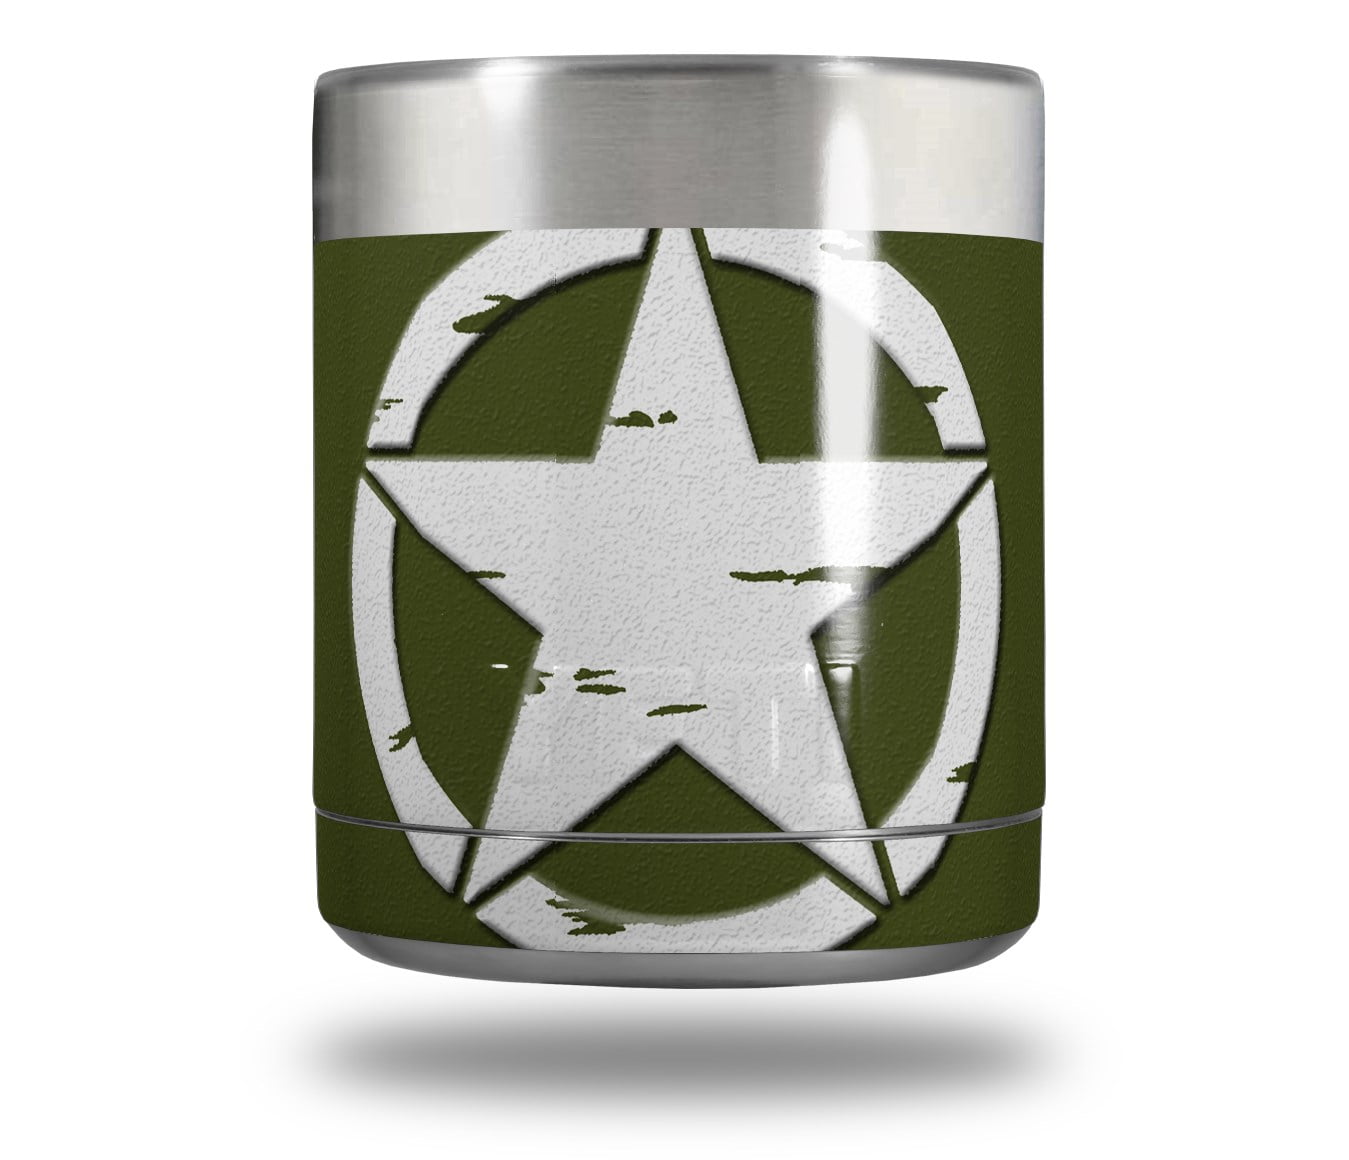  Skin Decal Wrap for Yeti Tumbler Rambler 30 oz Camouflage Green  (Tumbler NOT Included)